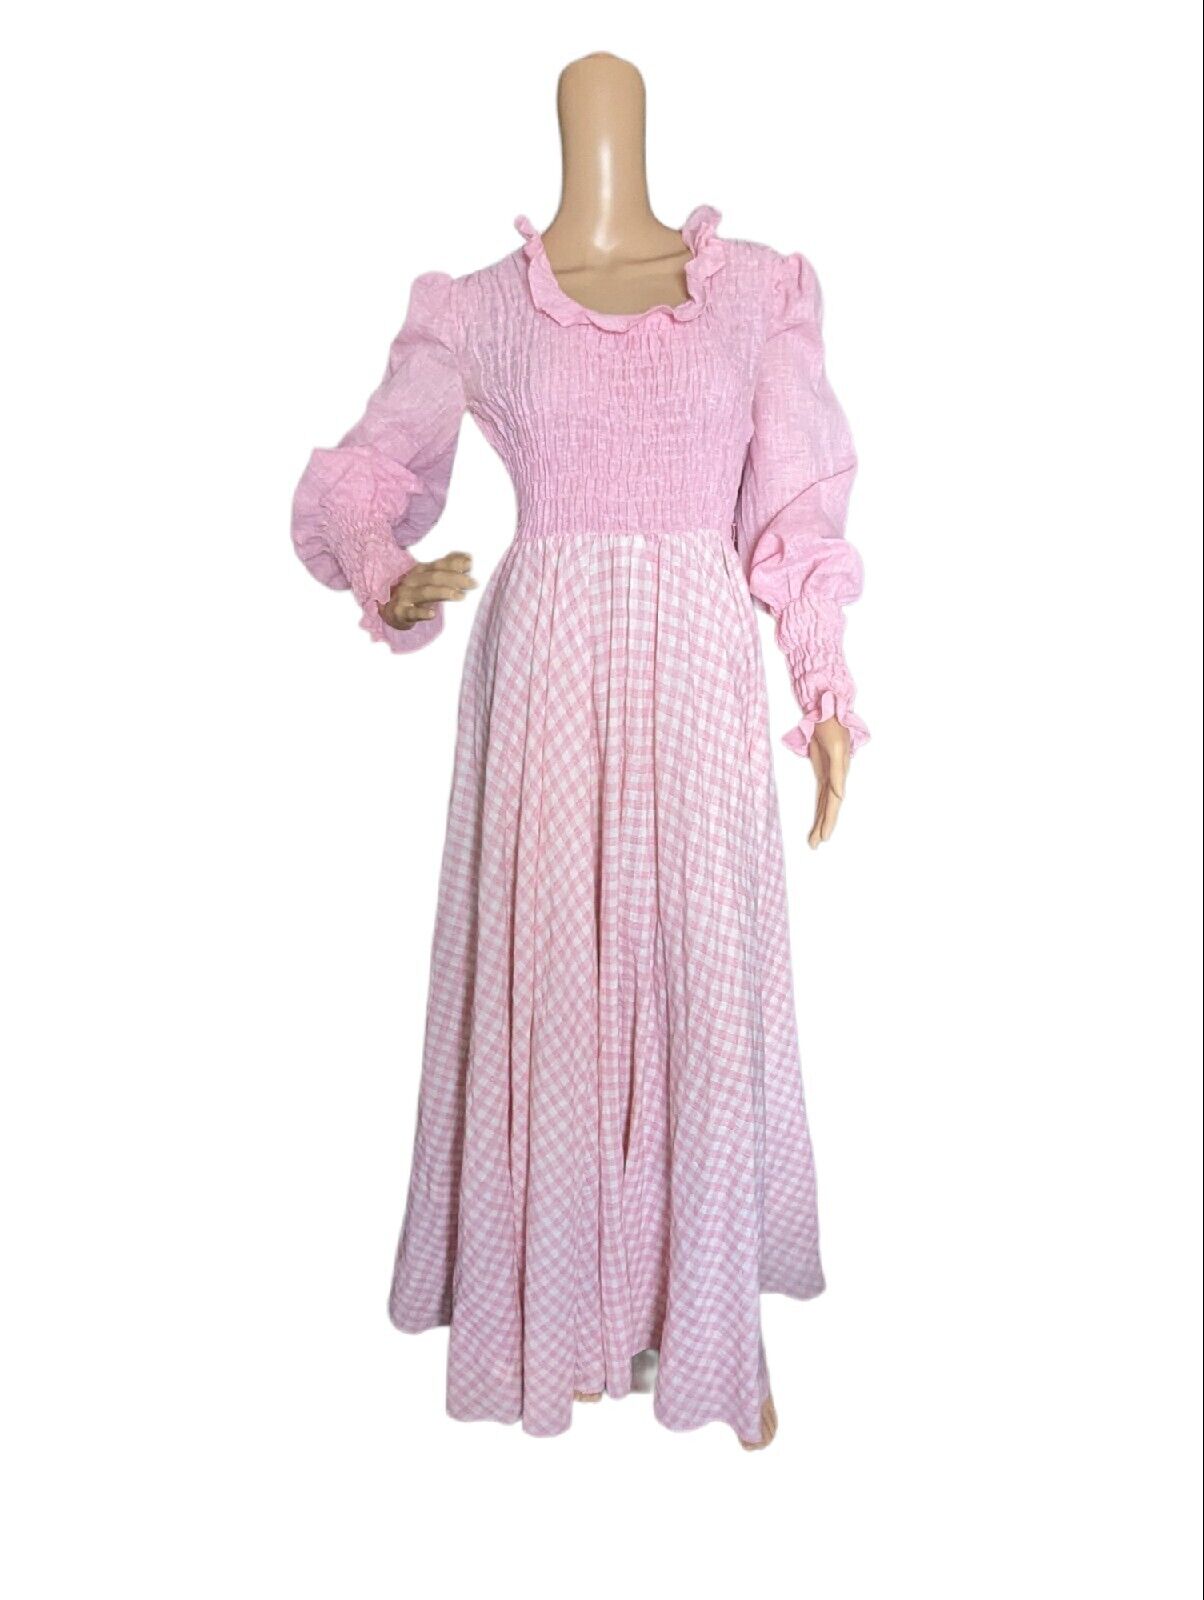 Vintage 70s Pink Gingham Check Country Westen Cottagecore Prairie Party Dress